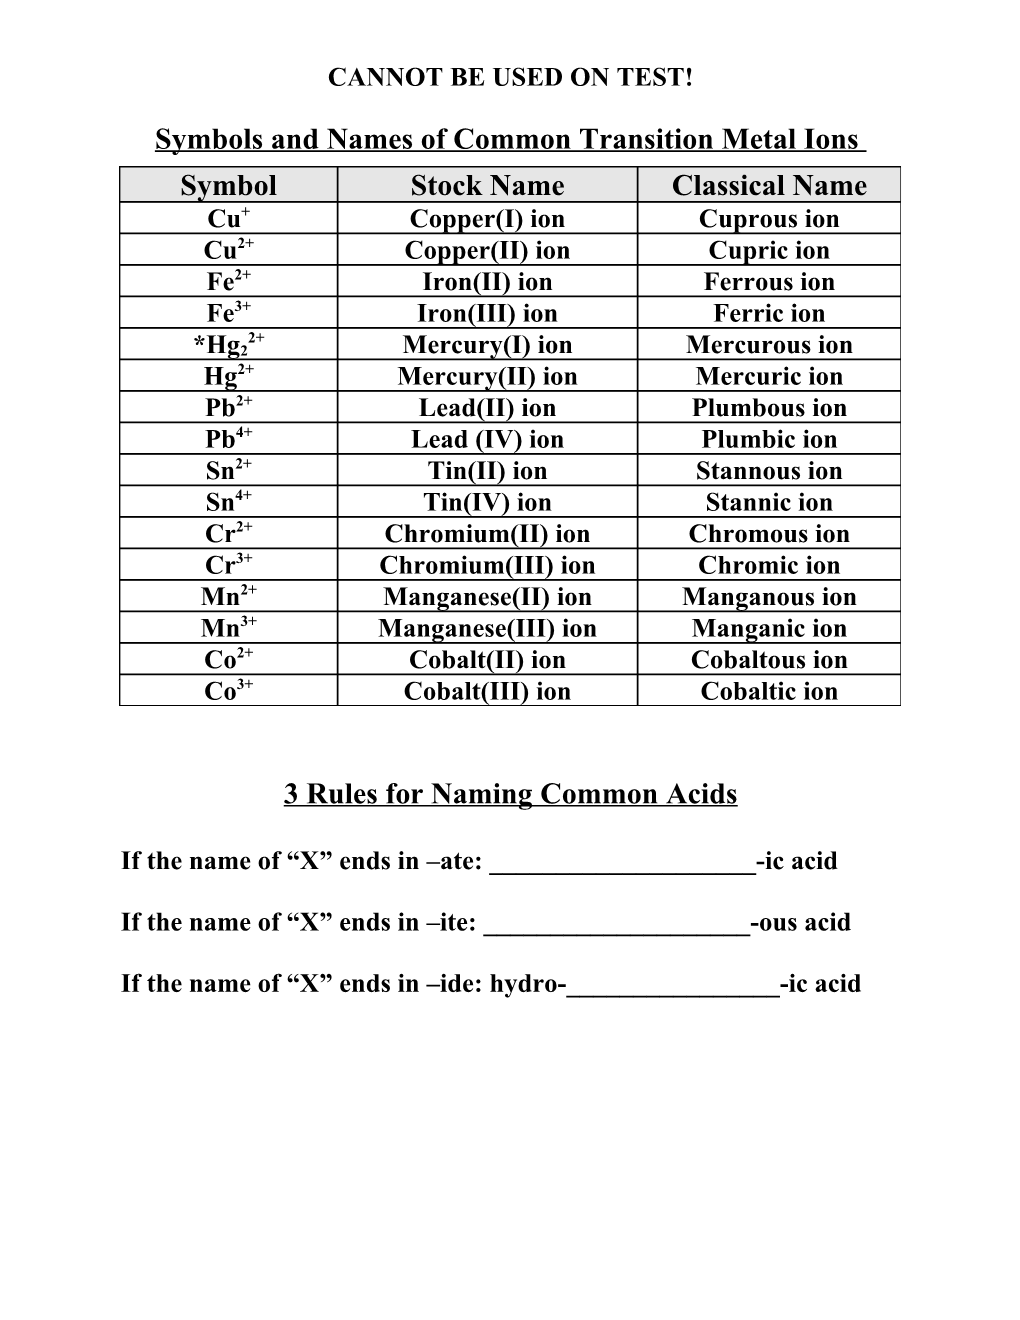 Symbols and Names of Common Transition Metal Ions